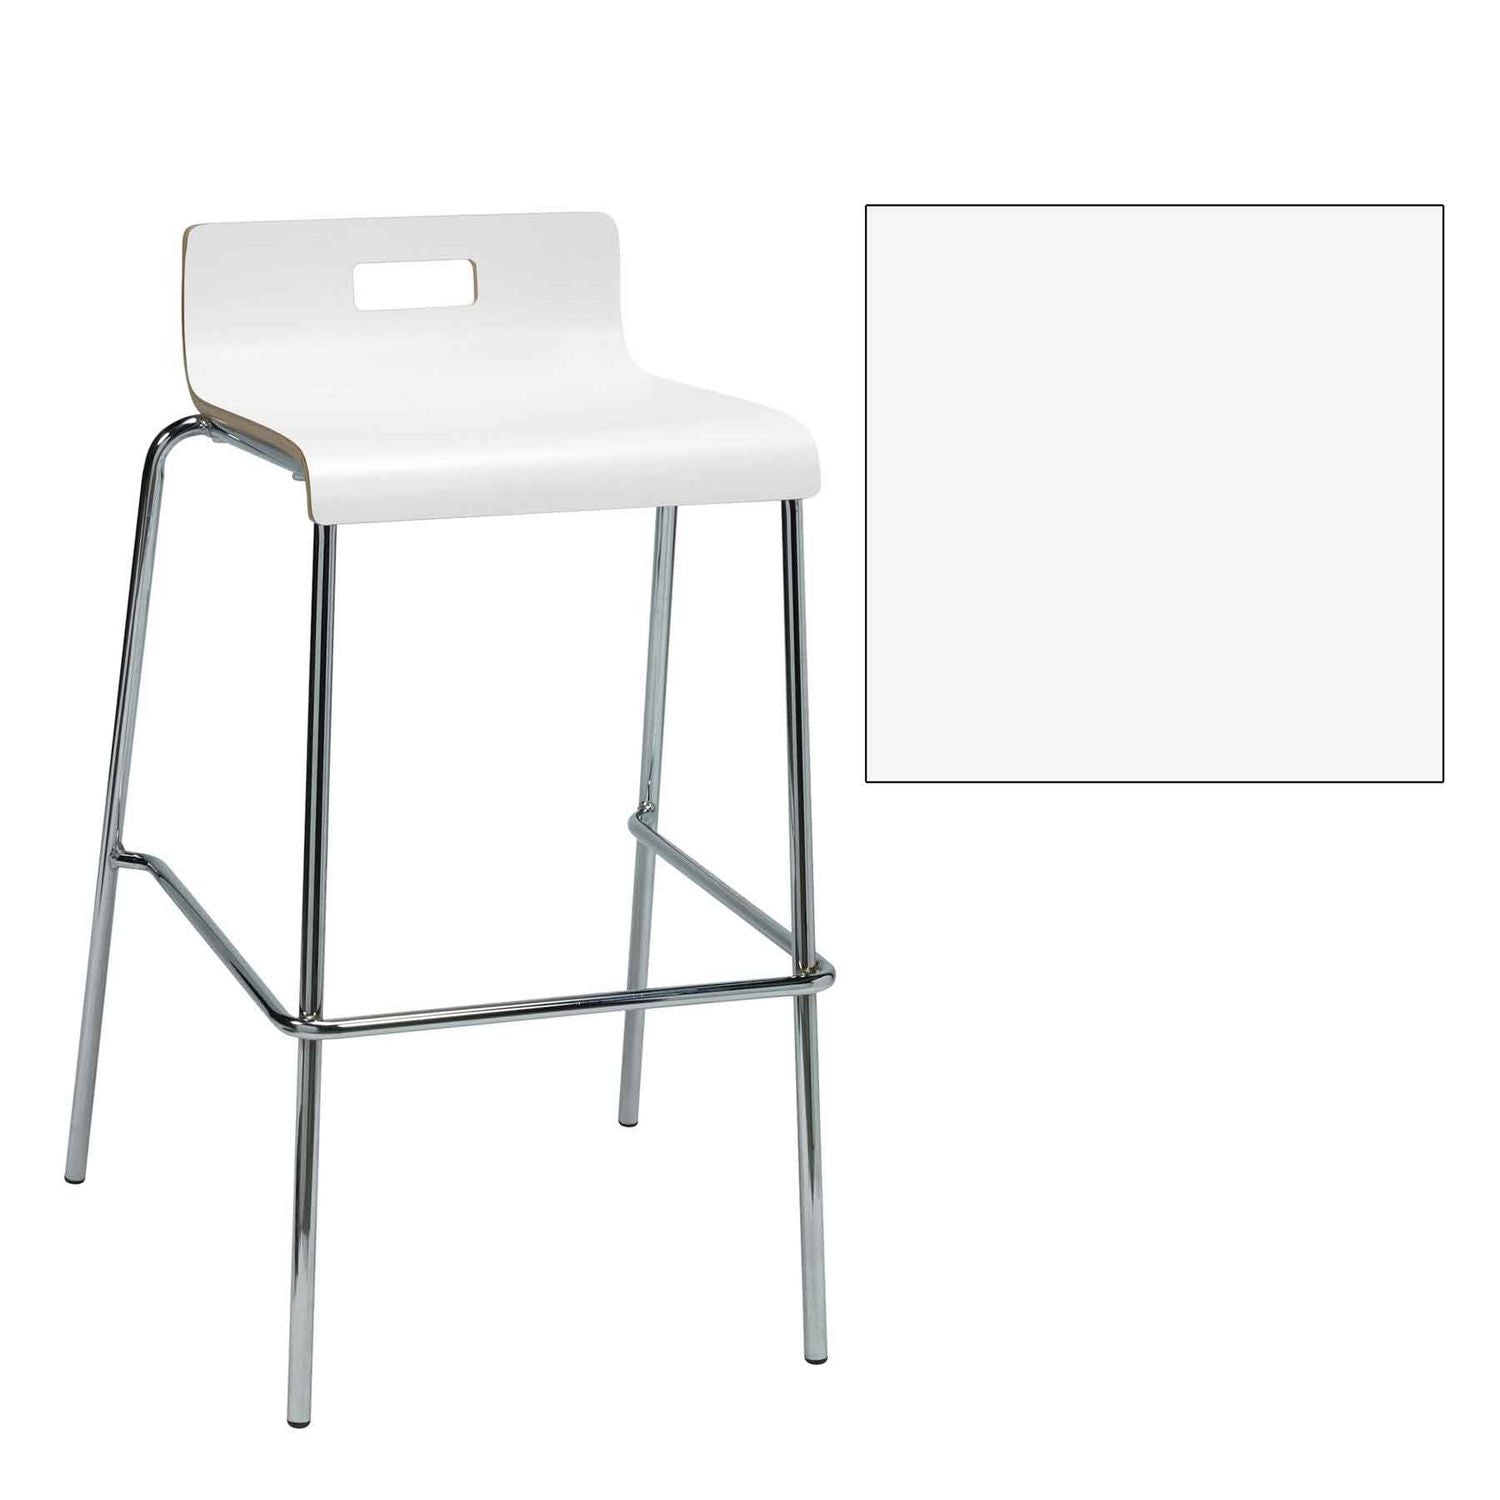 pedestal-bistro-table-with-four-white-jive-series-barstools-square-36-x-36-x-41-designer-white-ships-in-4-6-business-days_kfi811774039918 - 4